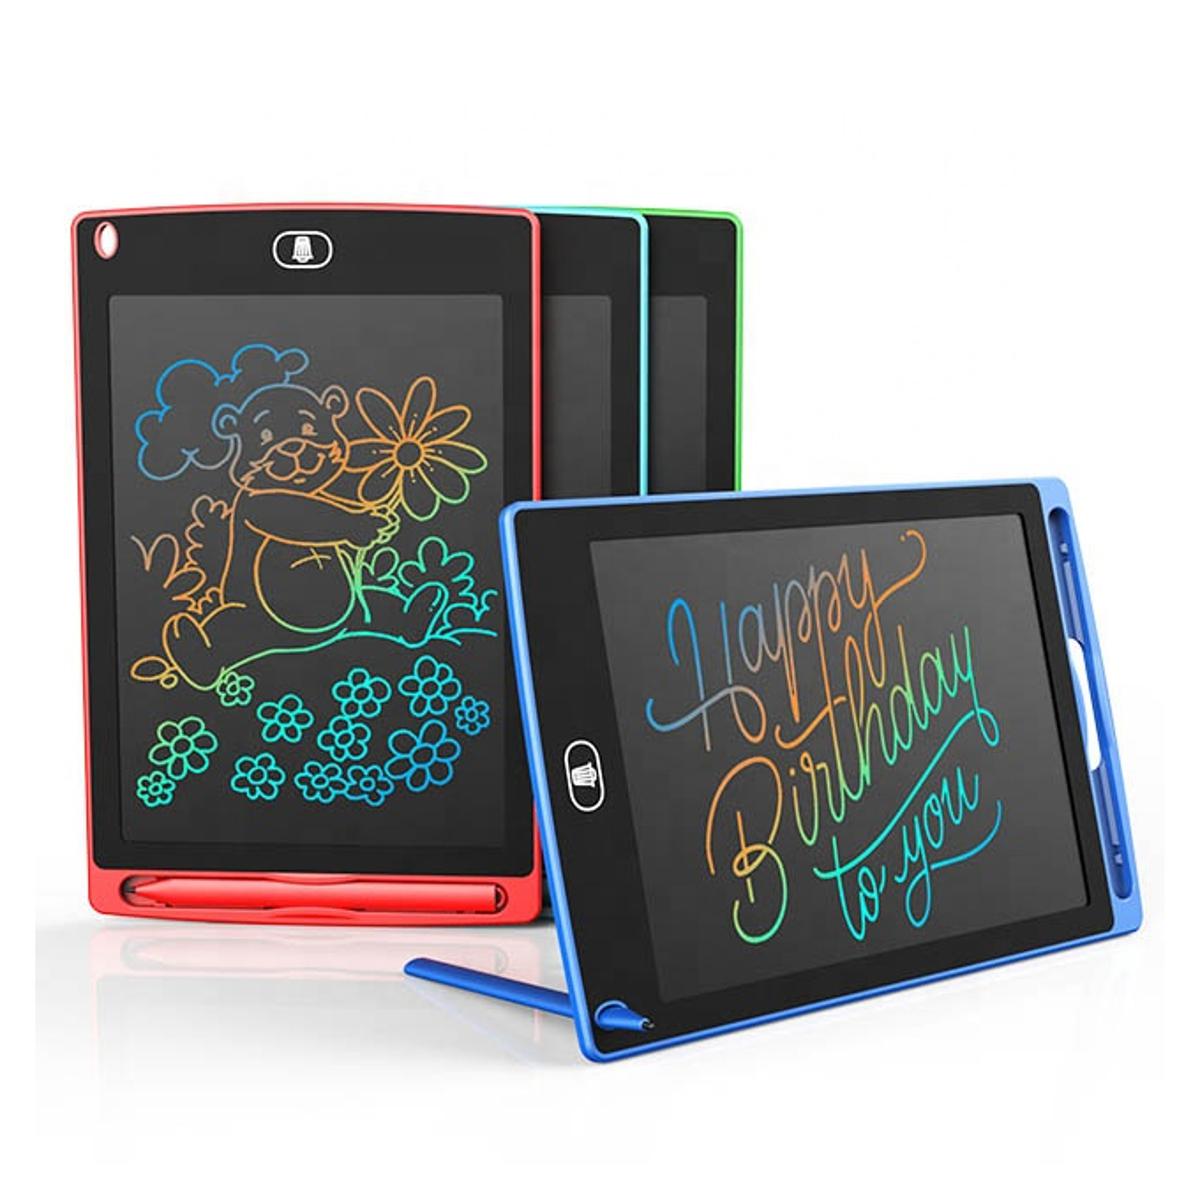 Colorful 8.5 Inch LCD Writing Tablet for Kids -